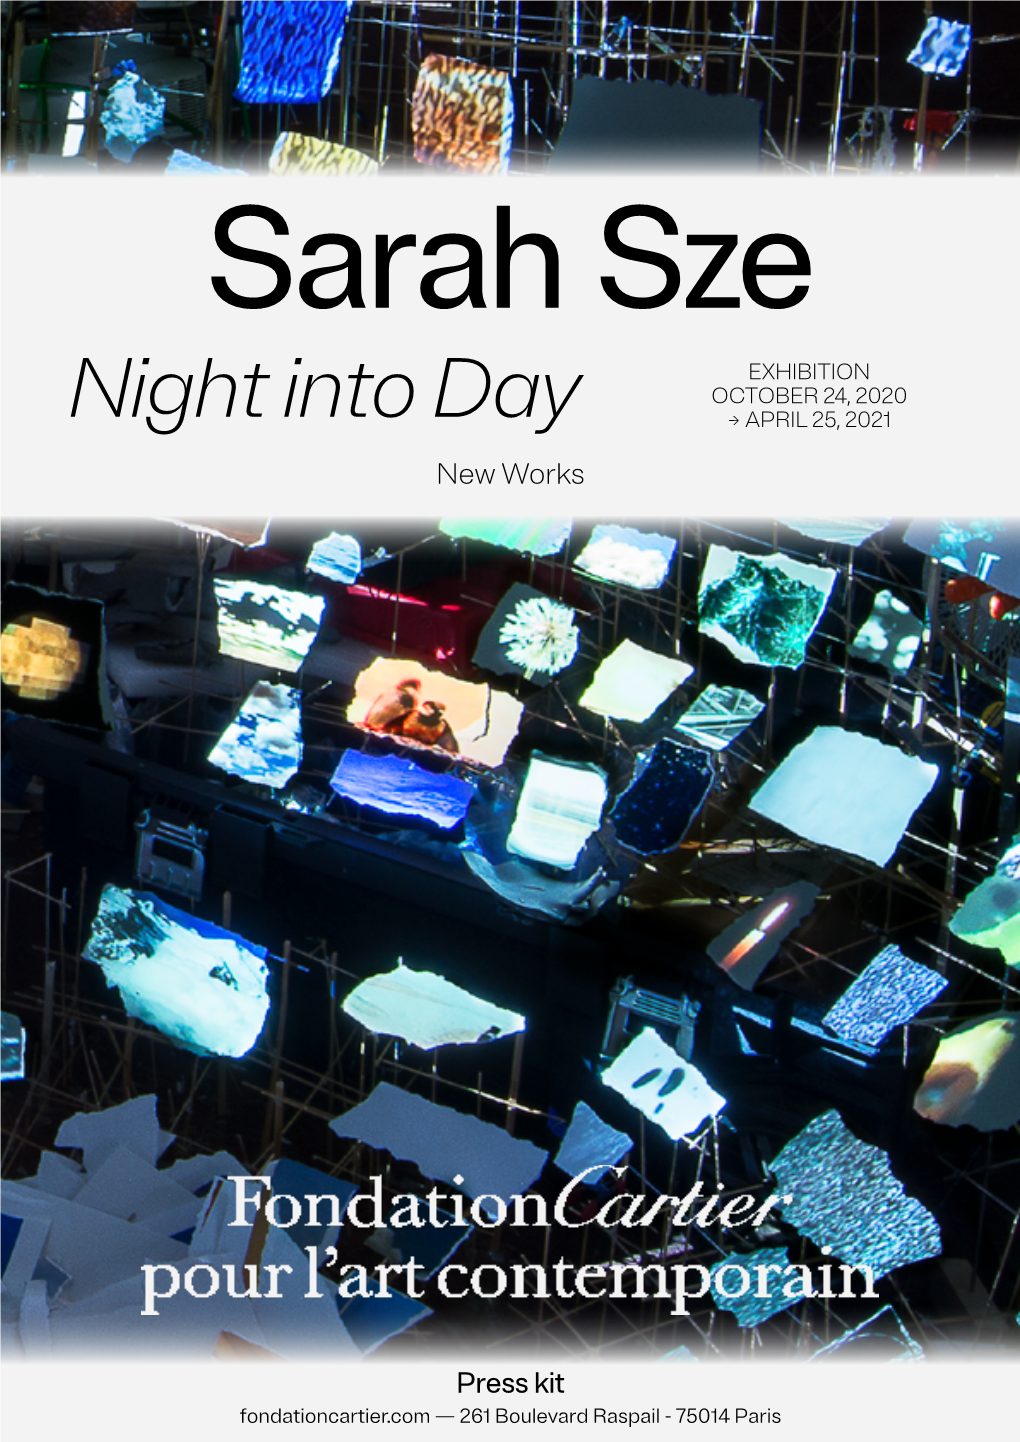 Sarah Szeexhibition OCTOBER 24, 2020 Night Into Day → APRIL 25, 2021 New Works